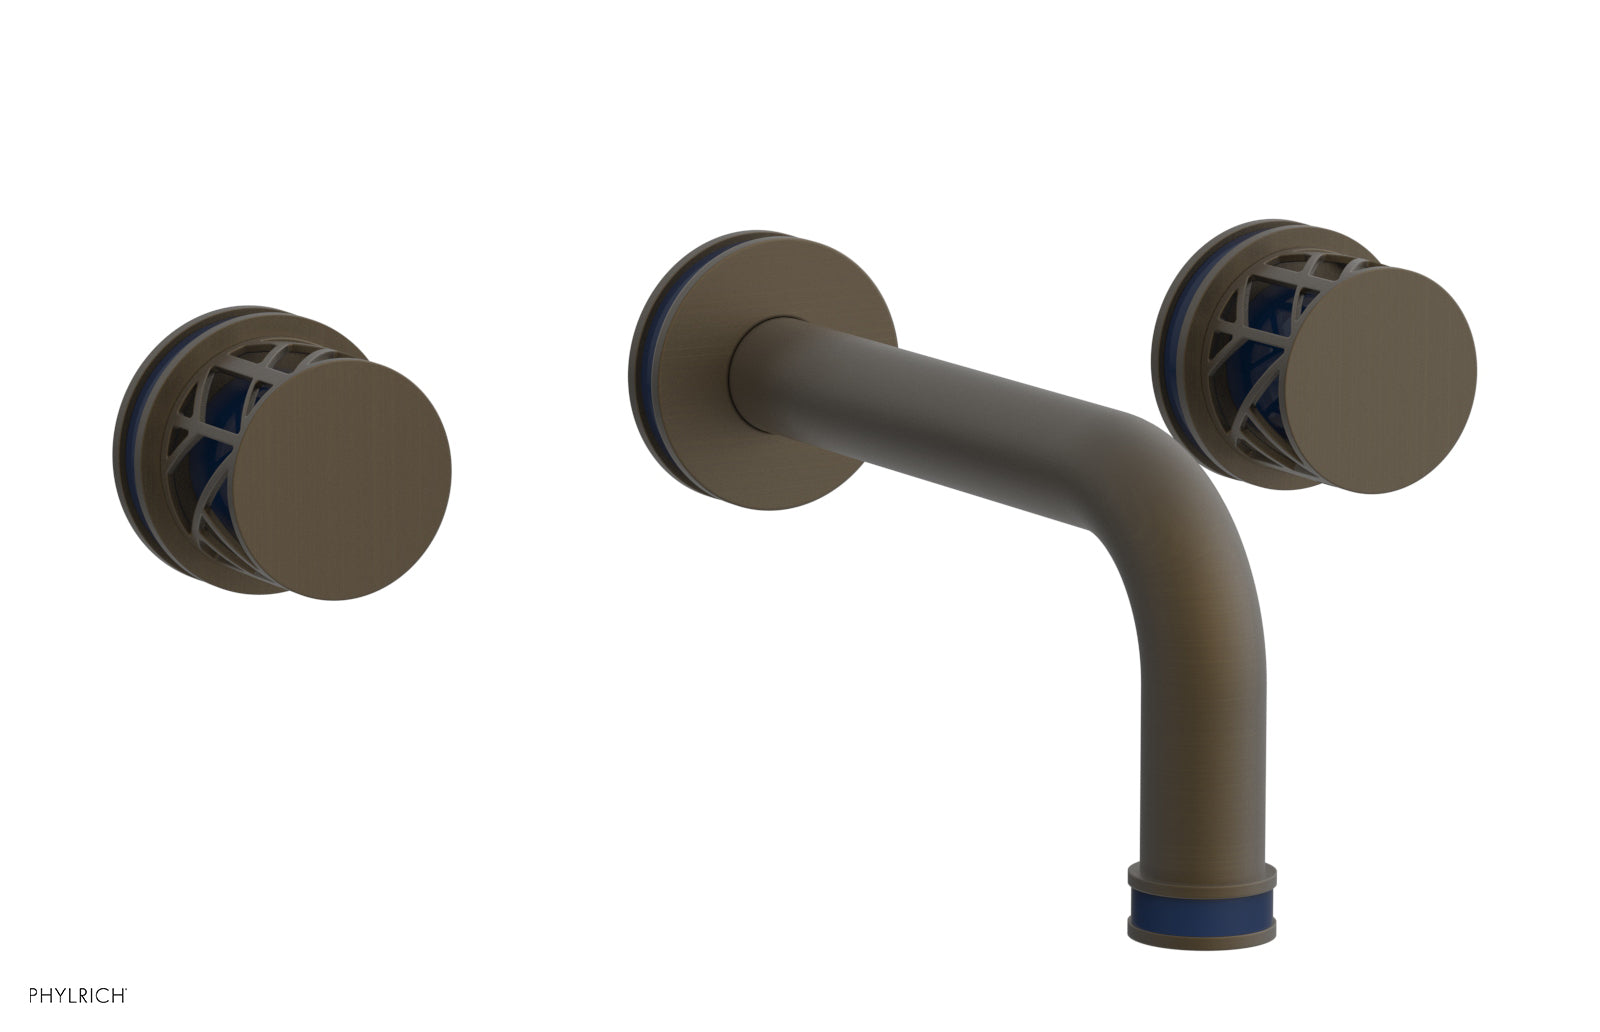 Phylrich JOLIE Wall Lavatory Set - Round Handles with "Navy blue" Accents